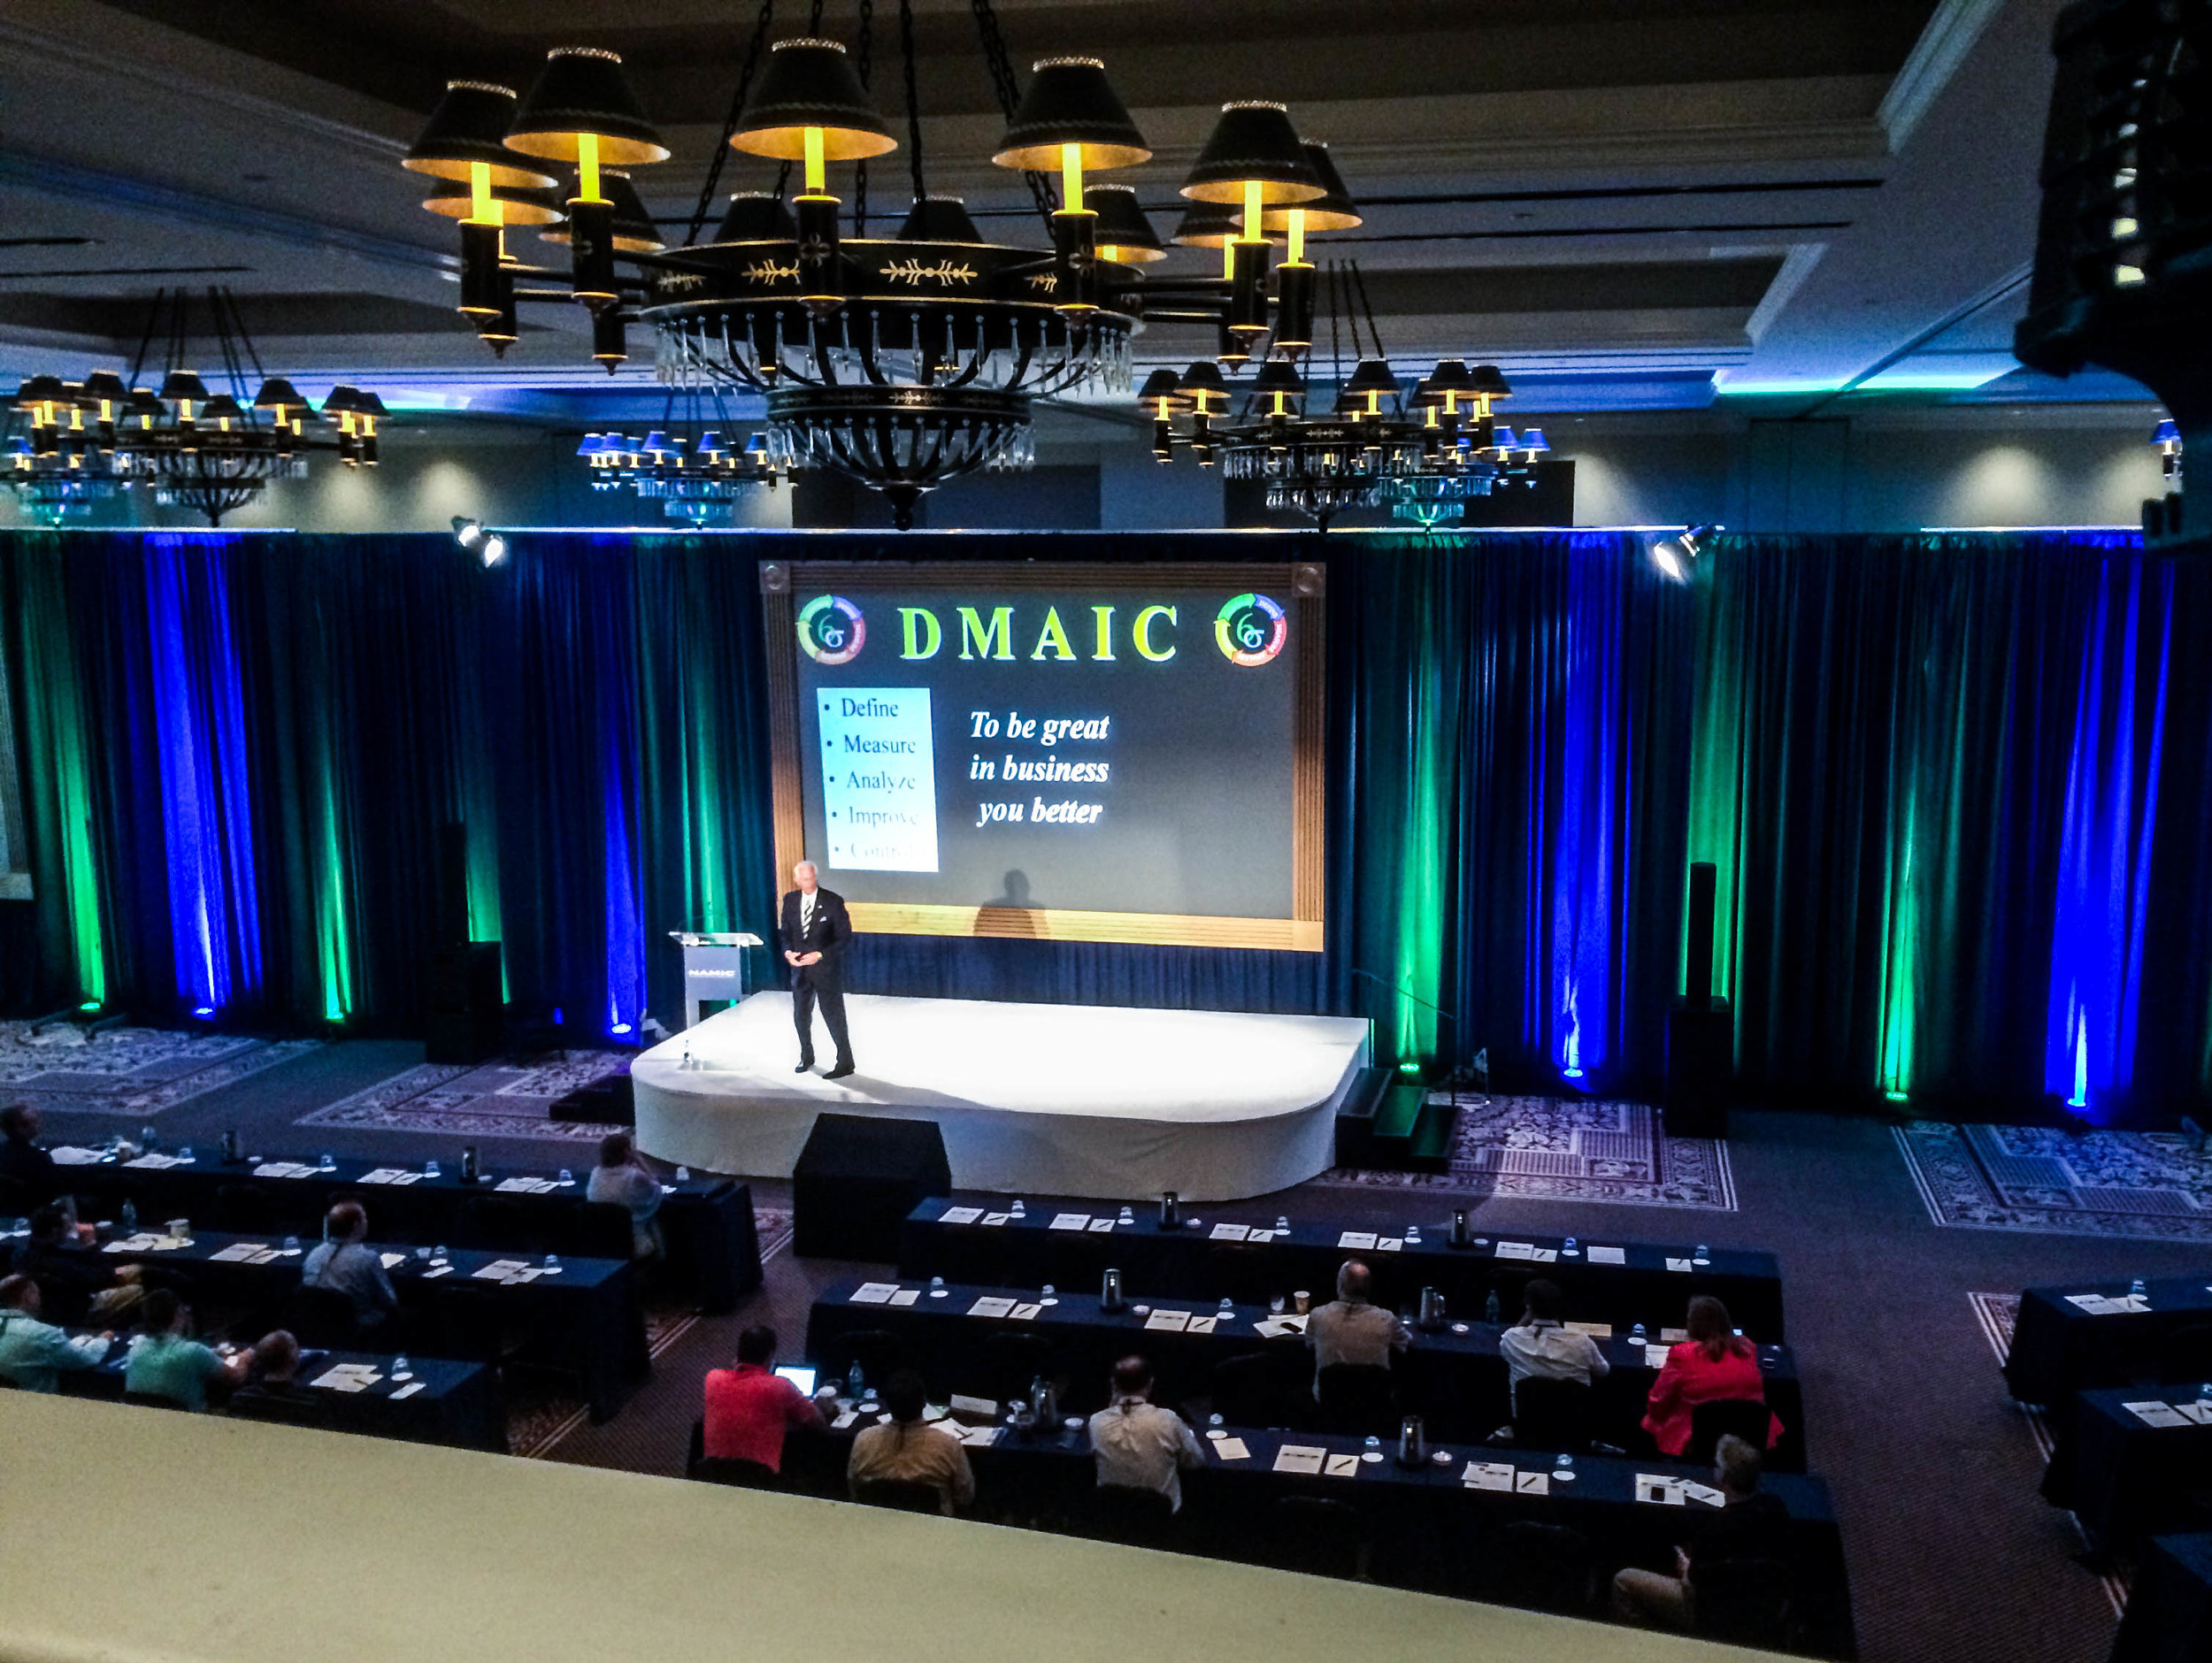 NAMIC - Meetings and Conferences - Live Events - Rentals and Staging - The AV Company